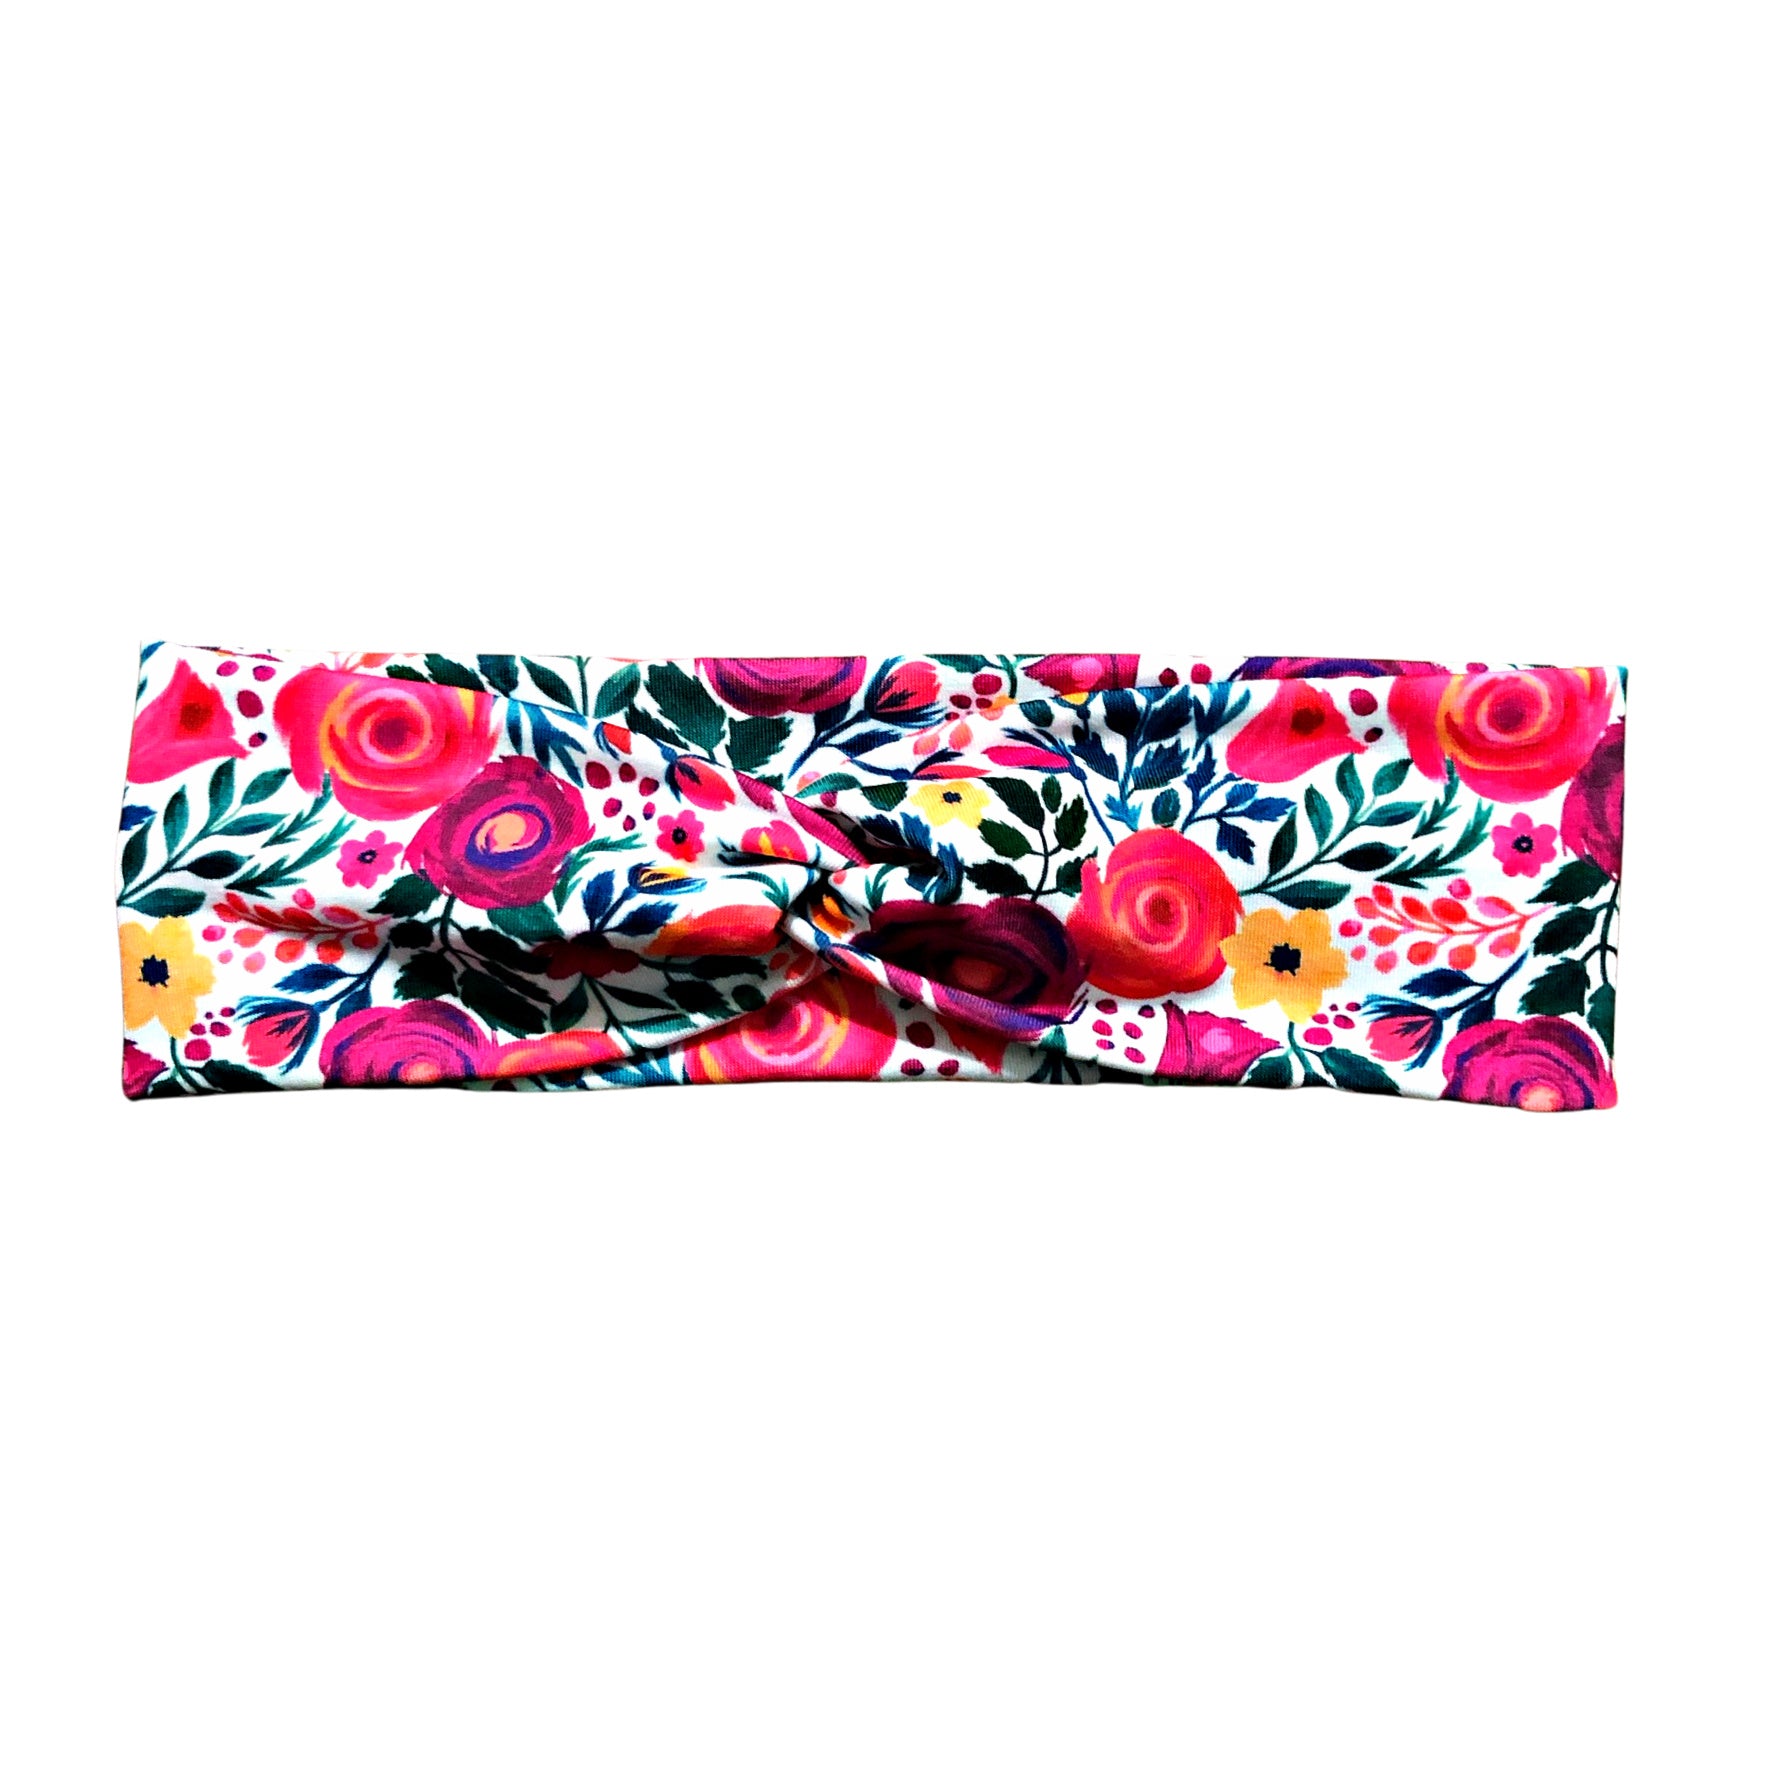 Neon Floral Headband for Women